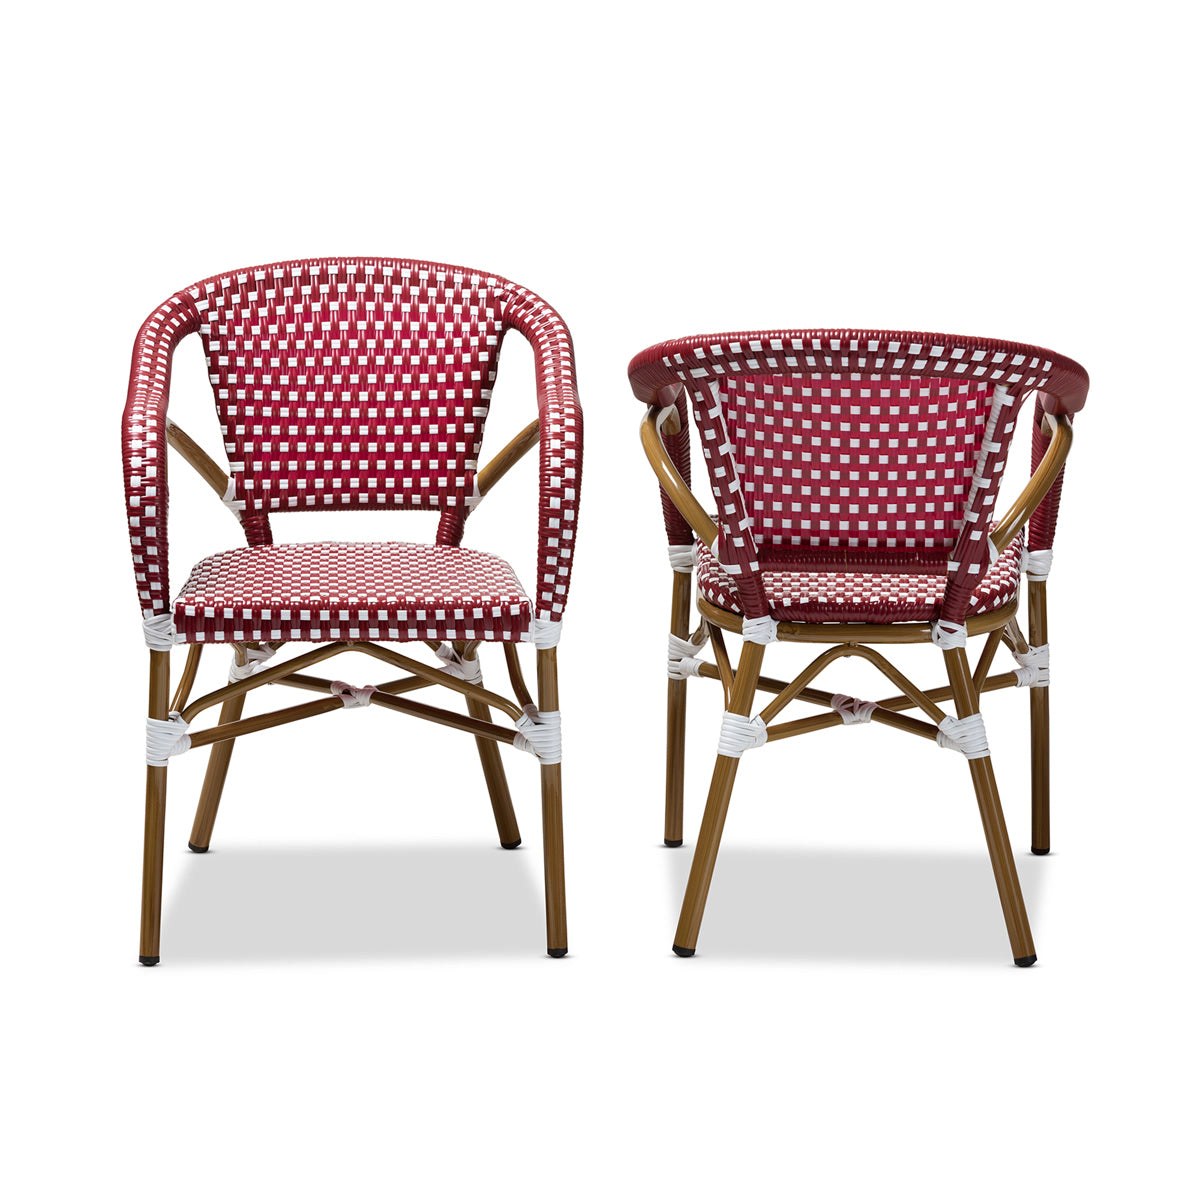 Baxton Studio Eliane Classic French Indoor and Outdoor Red and White Bamboo Style Stackable Bistro Dining Chair Set of 2 Baxton Studio-dining chair-Minimal And Modern - 2